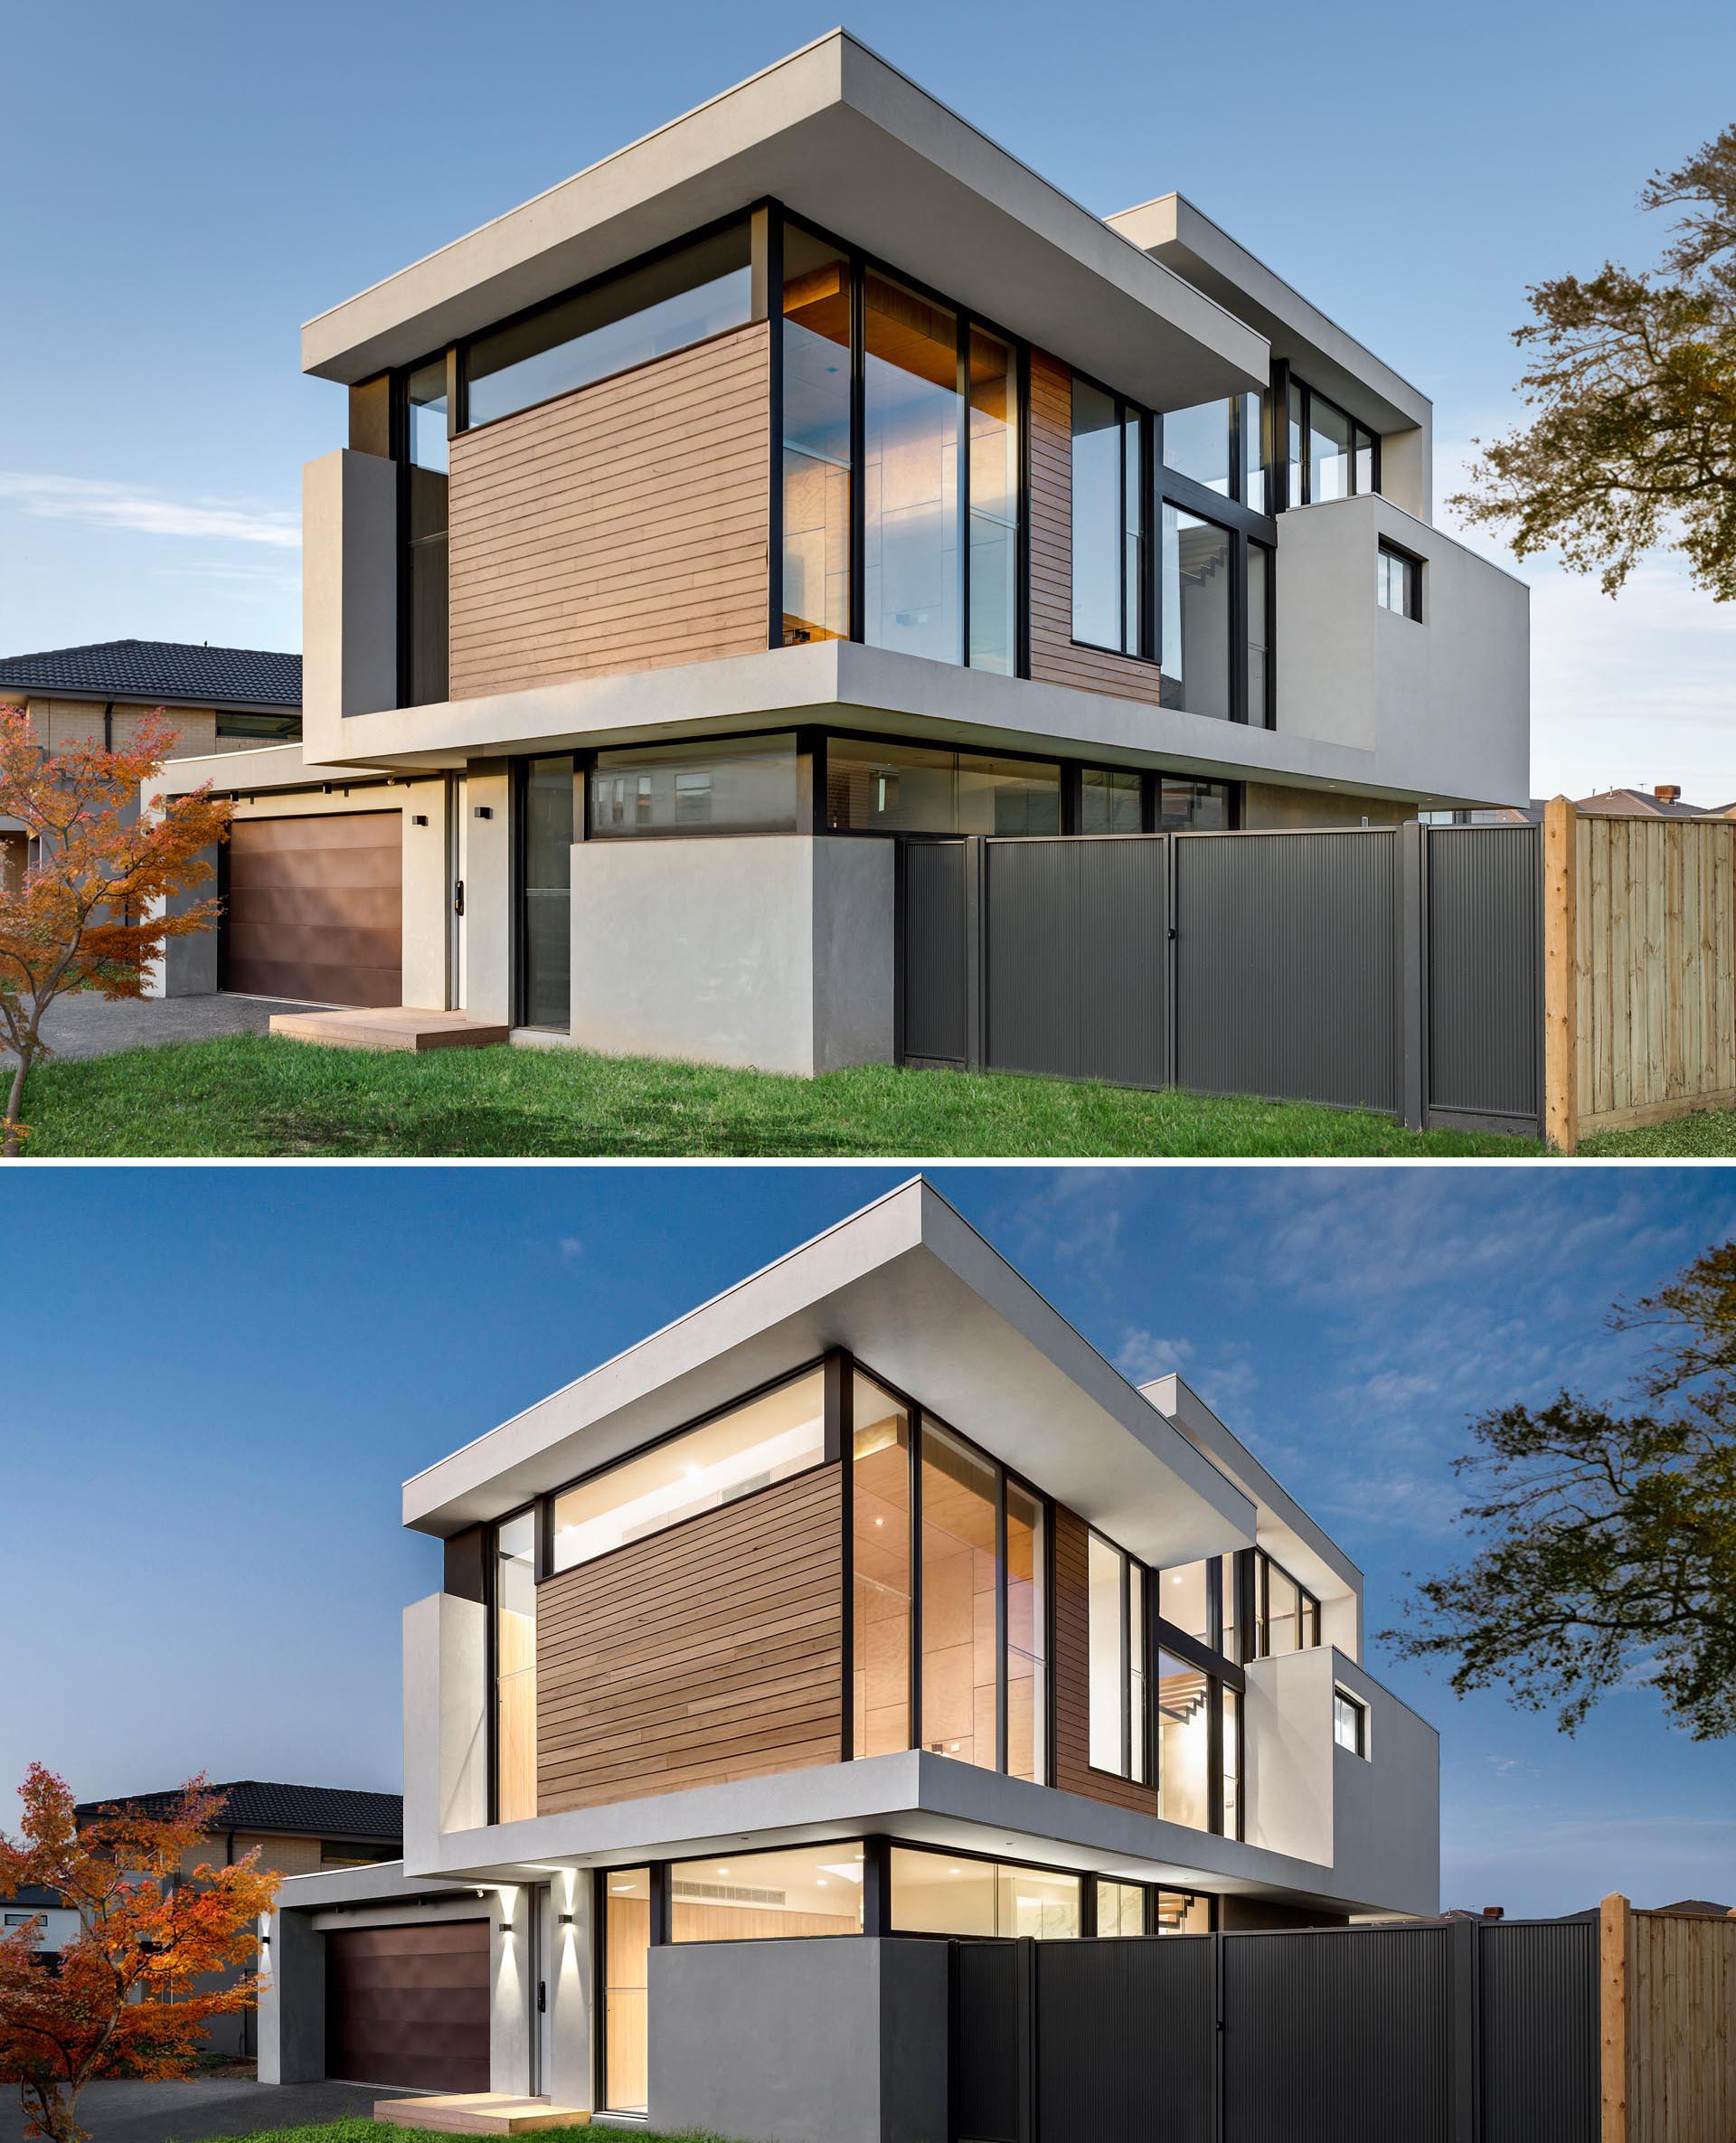 This modern three level home has an exterior that's been clad with Blackbutt timber and full-height windows on the north-east facade, while the west facade features large eaves and slot windows.